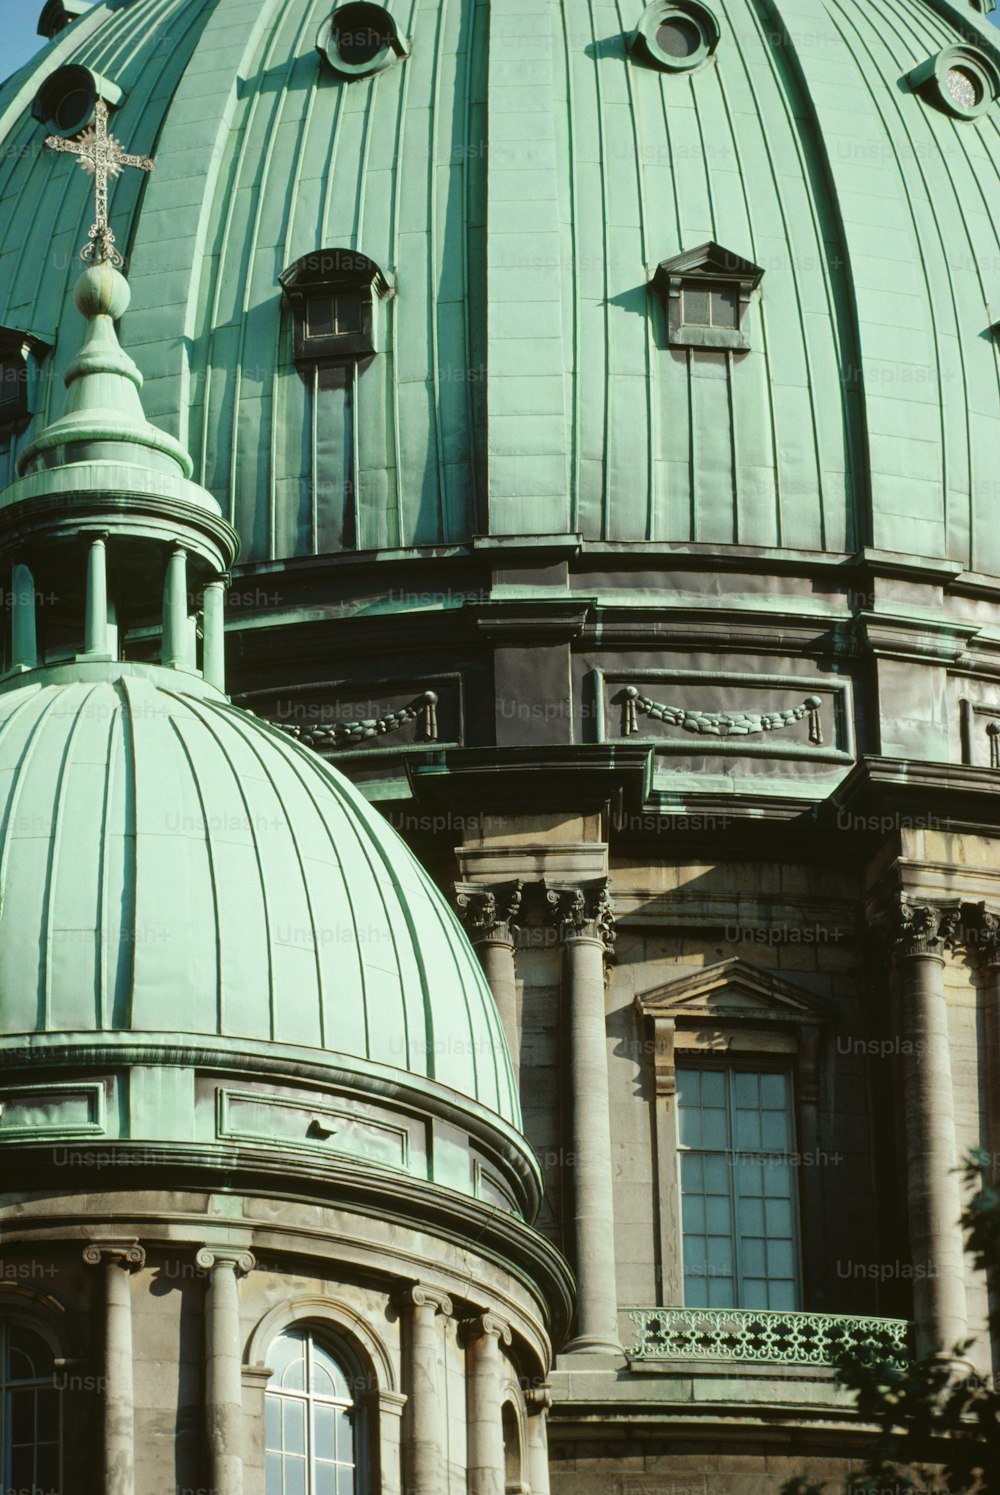 a large green dome on top of a building